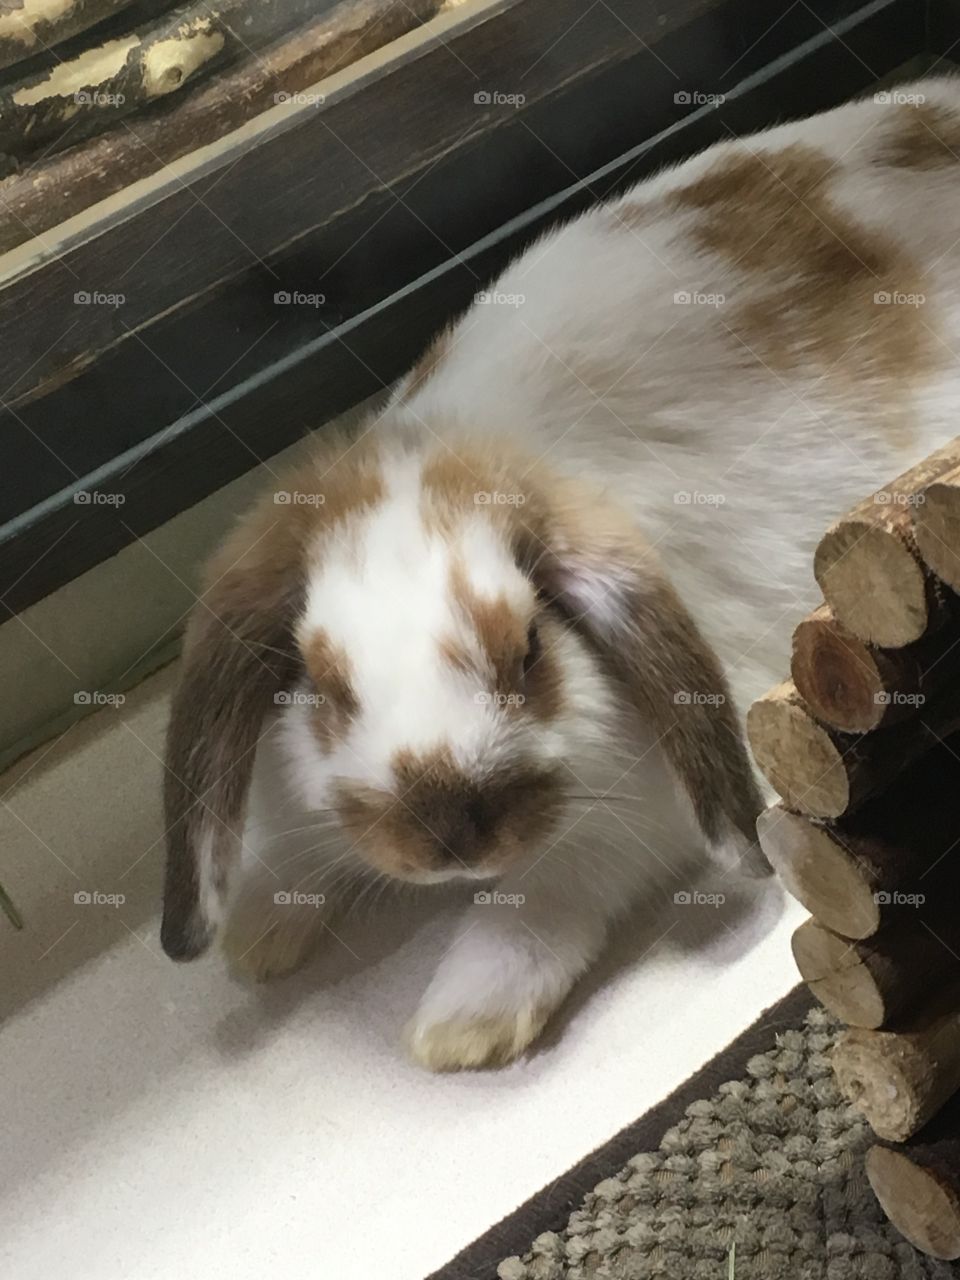 Bunny at the pet store 